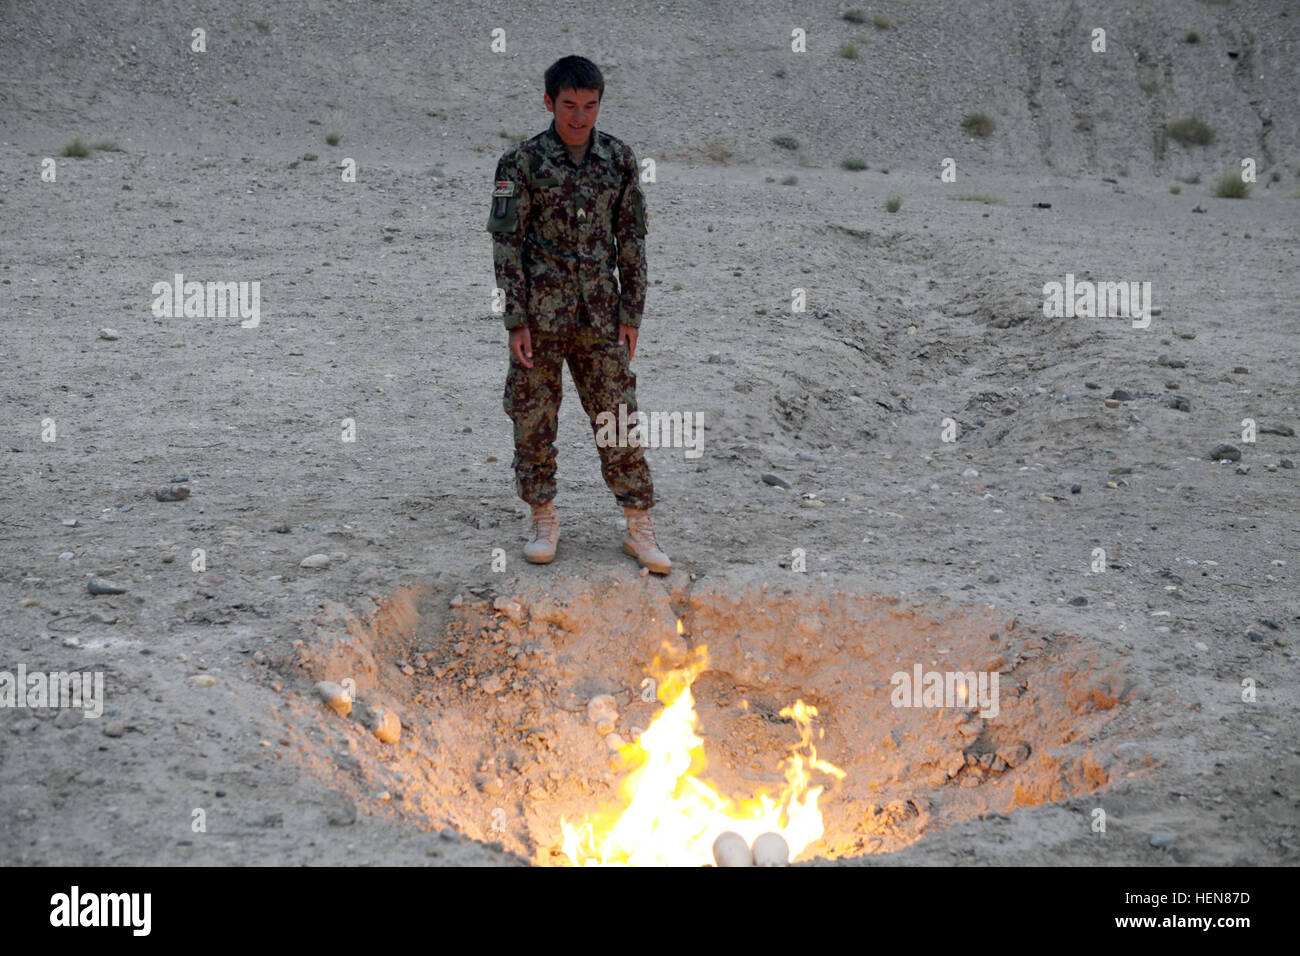 An Afghan National Army soldier oversees the burning of unexploded secondary high explosives during a training exercise at the demolition range on Forward Operating Base Gamberi, Laghman province, Nov. 5, 2013. The demolition range is the site for an Explosive Hazard Reduction Course for soldiers with the ANA. (U.S. Army photo by Spc. Ryan D. Green/Released) ANA Explosive Hazard Reduction Course 131105-A-YW808-145 Stock Photo